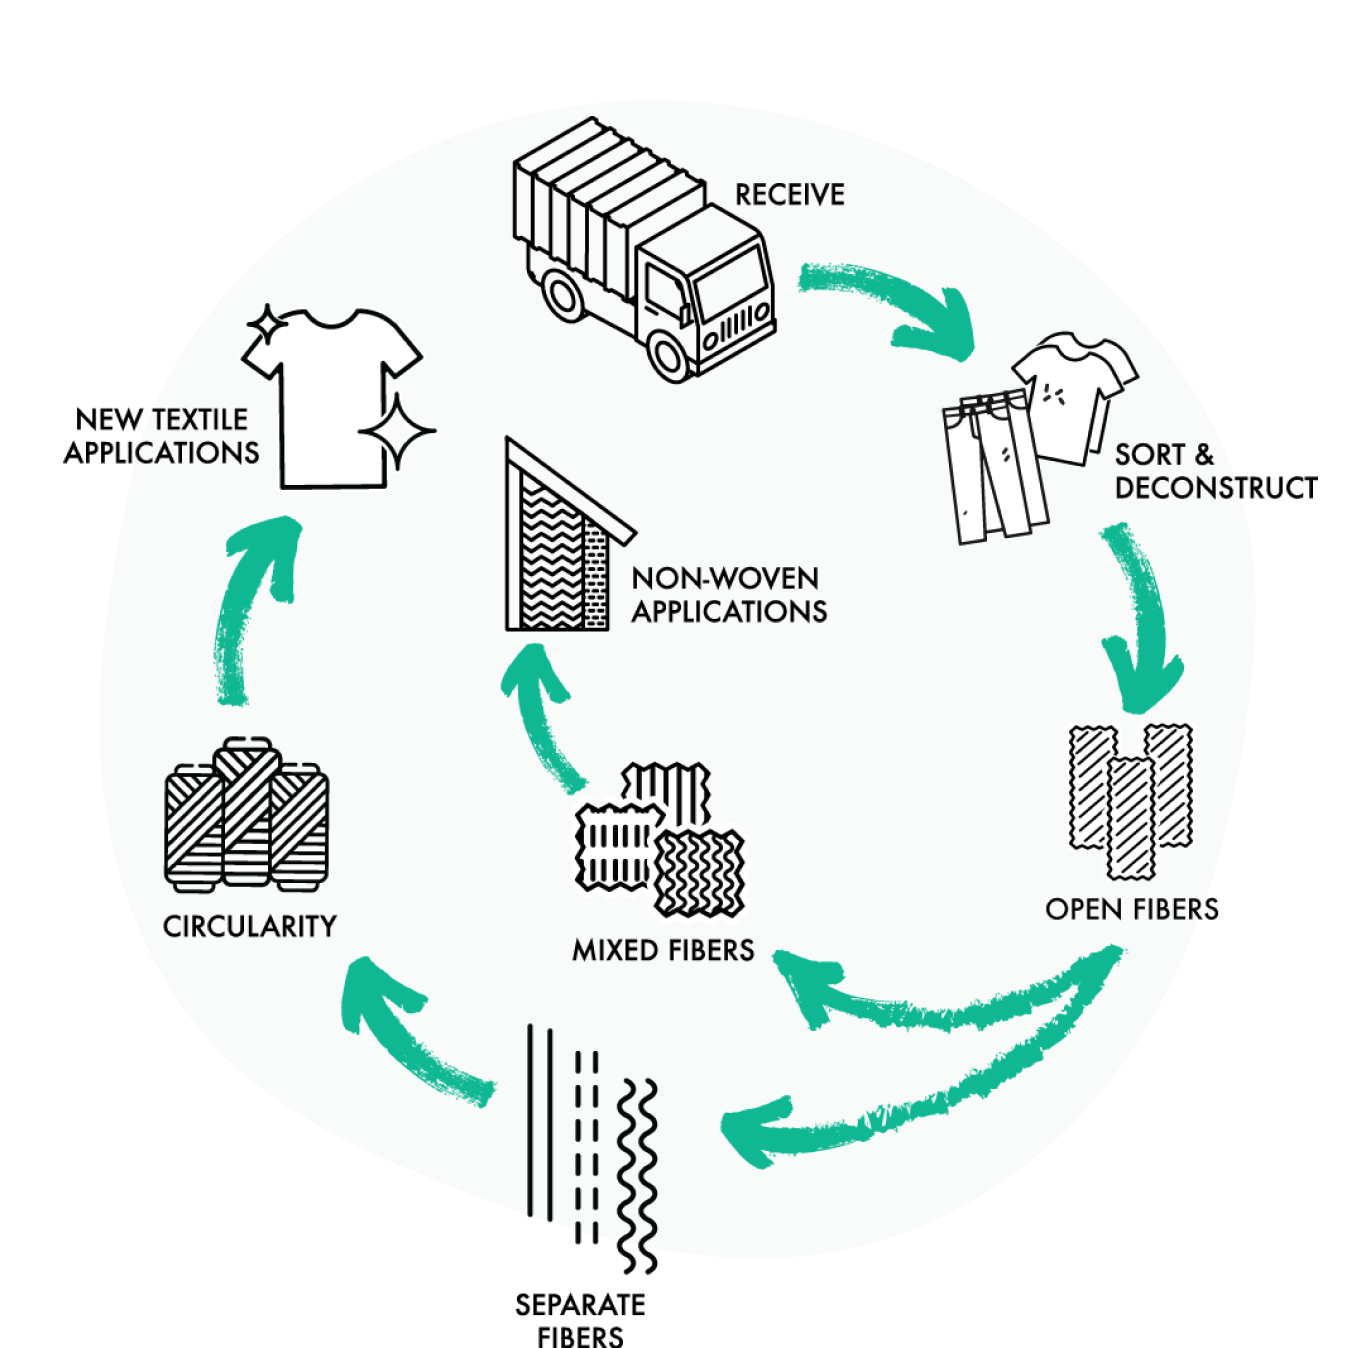 Diagram shows how to recycle clothes through circularity and downcycling. Steps include receive, sort, deconstruct, open fibers, and separate fibers. The circularity process ends with new textile applications. The downcycling process ends with fibers for non-woven applications.